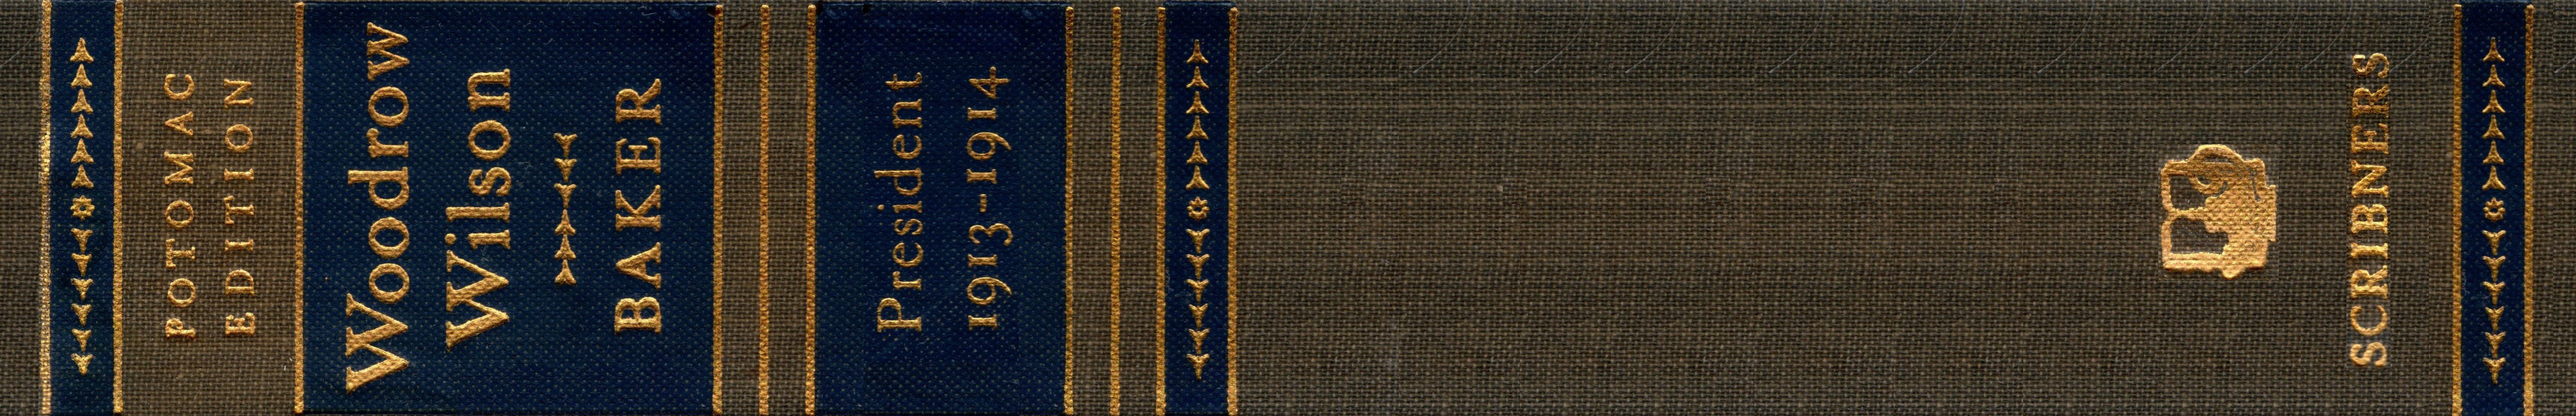 Image of the spine of Woodrow Wilson Life and Letters: President - 1913-14